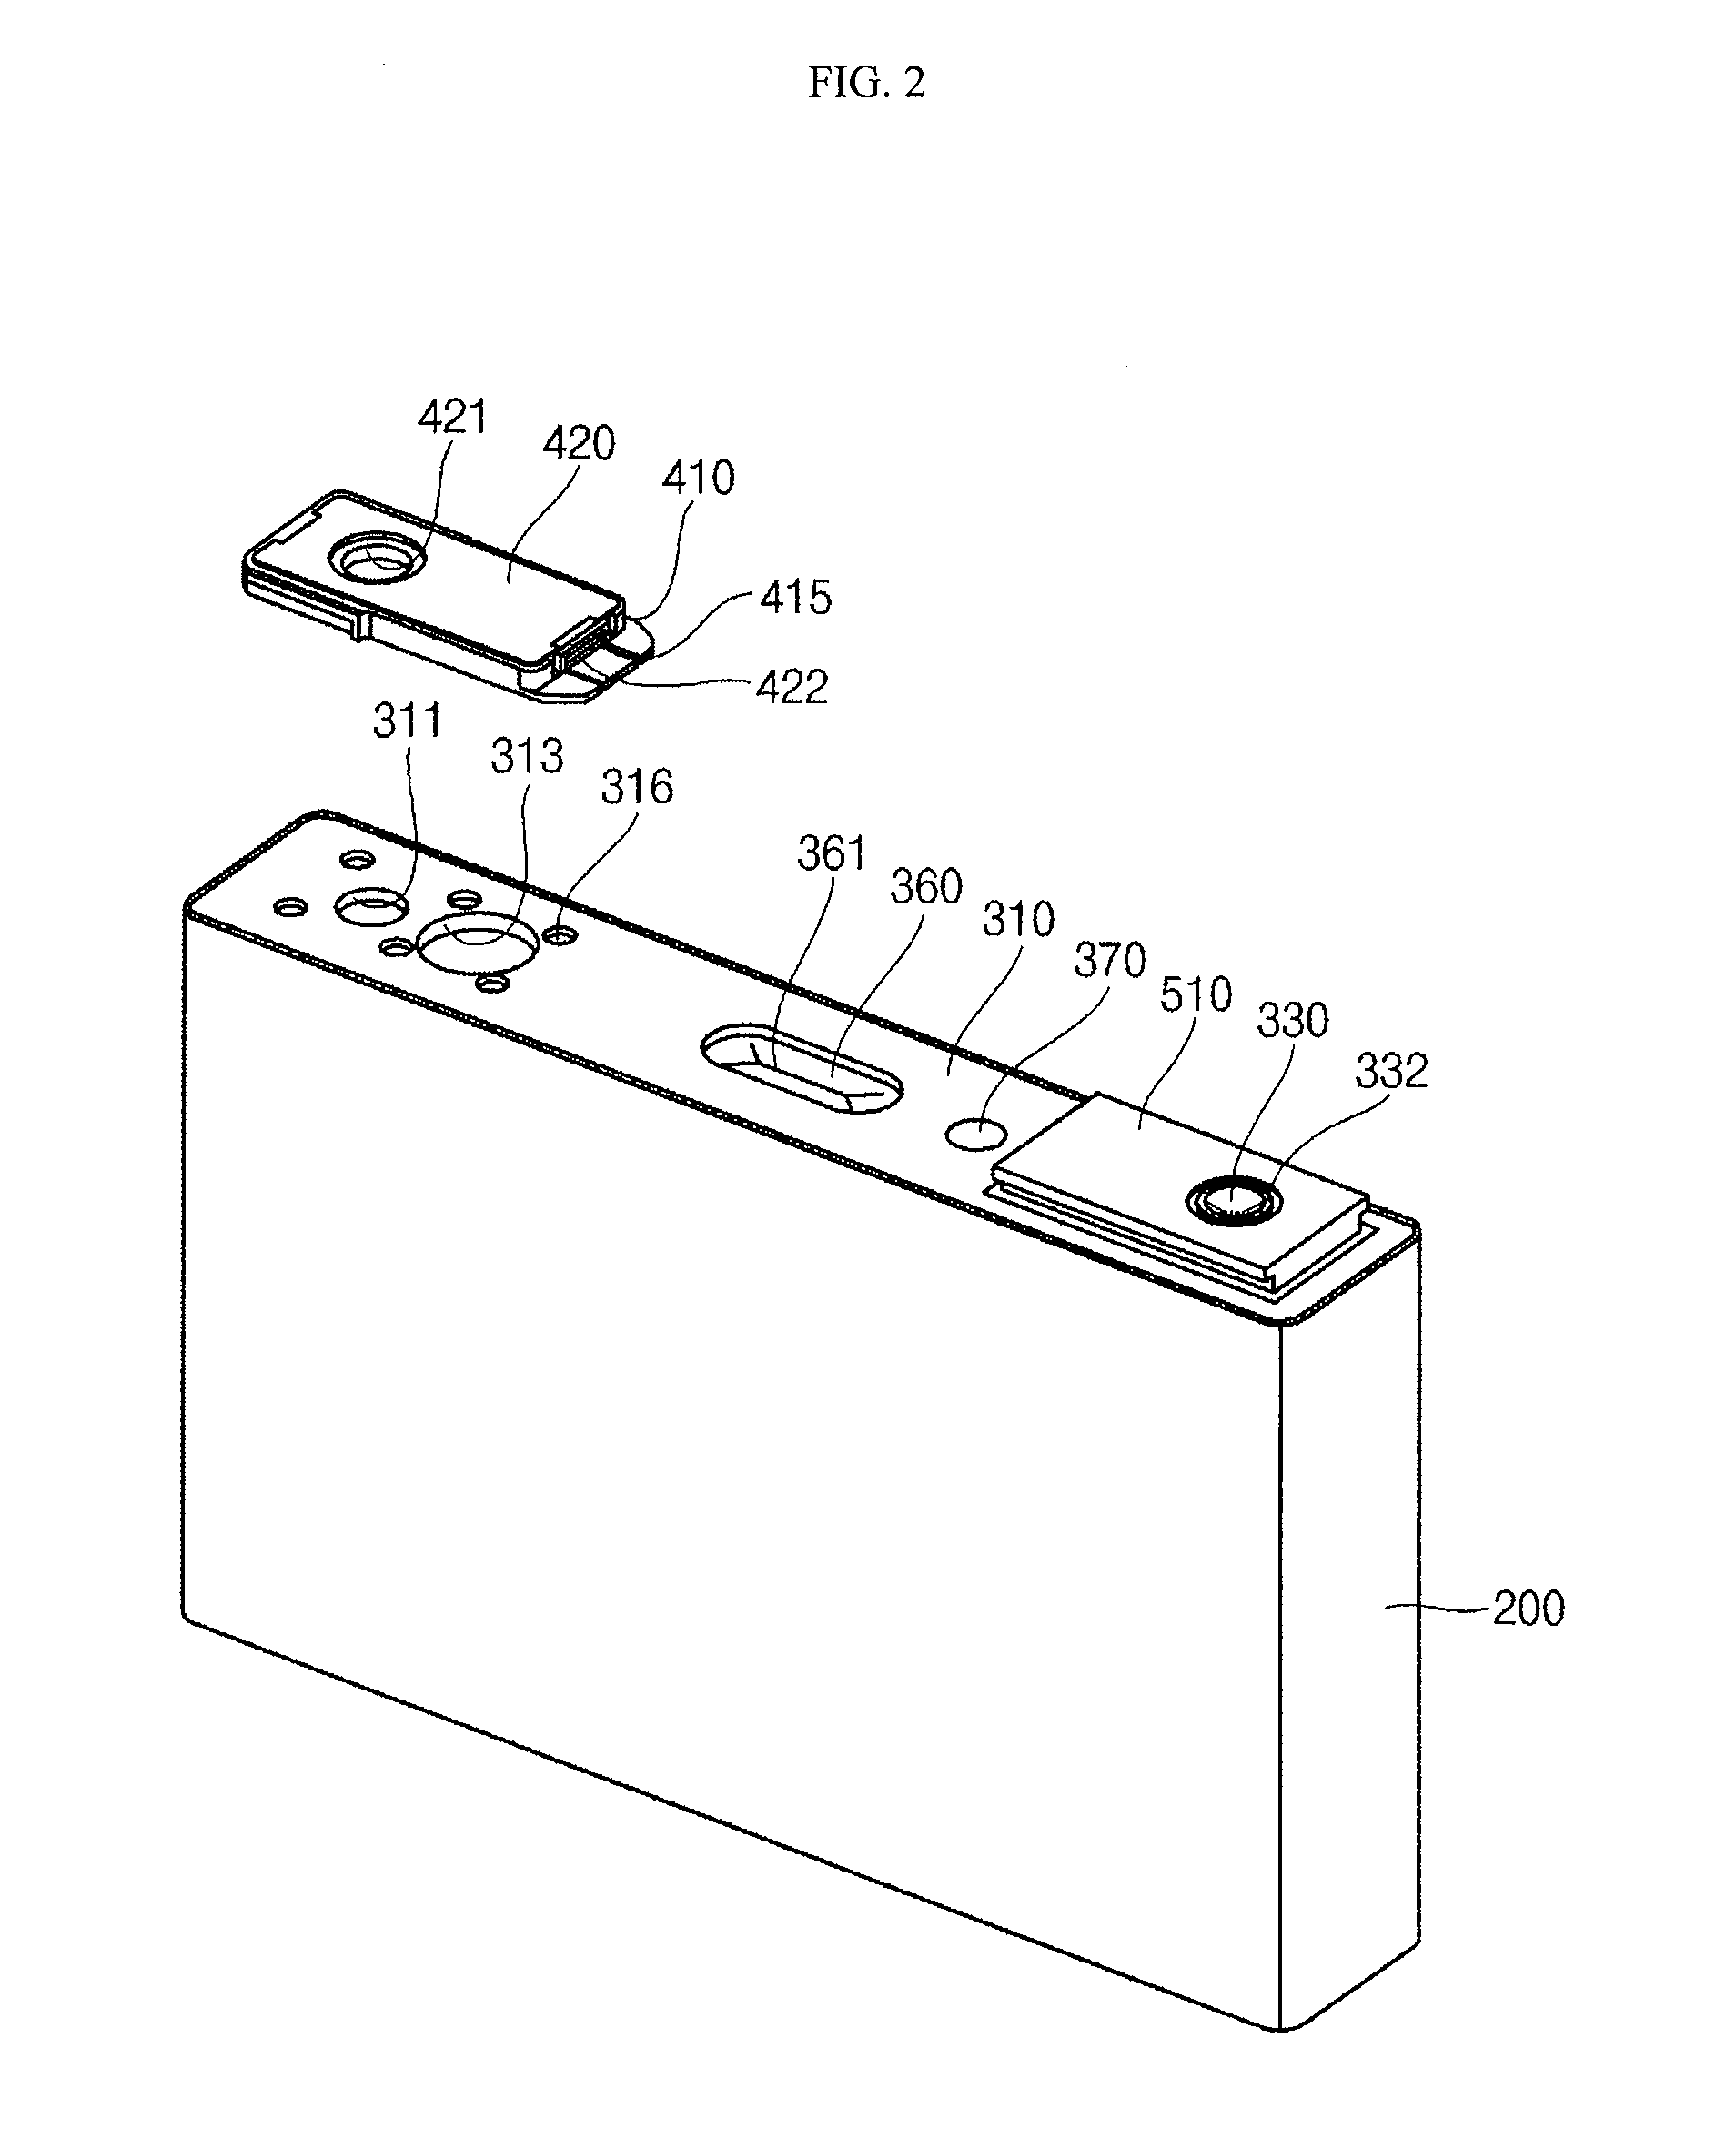 Secondary battery including a cap plate comprising an inversion plate